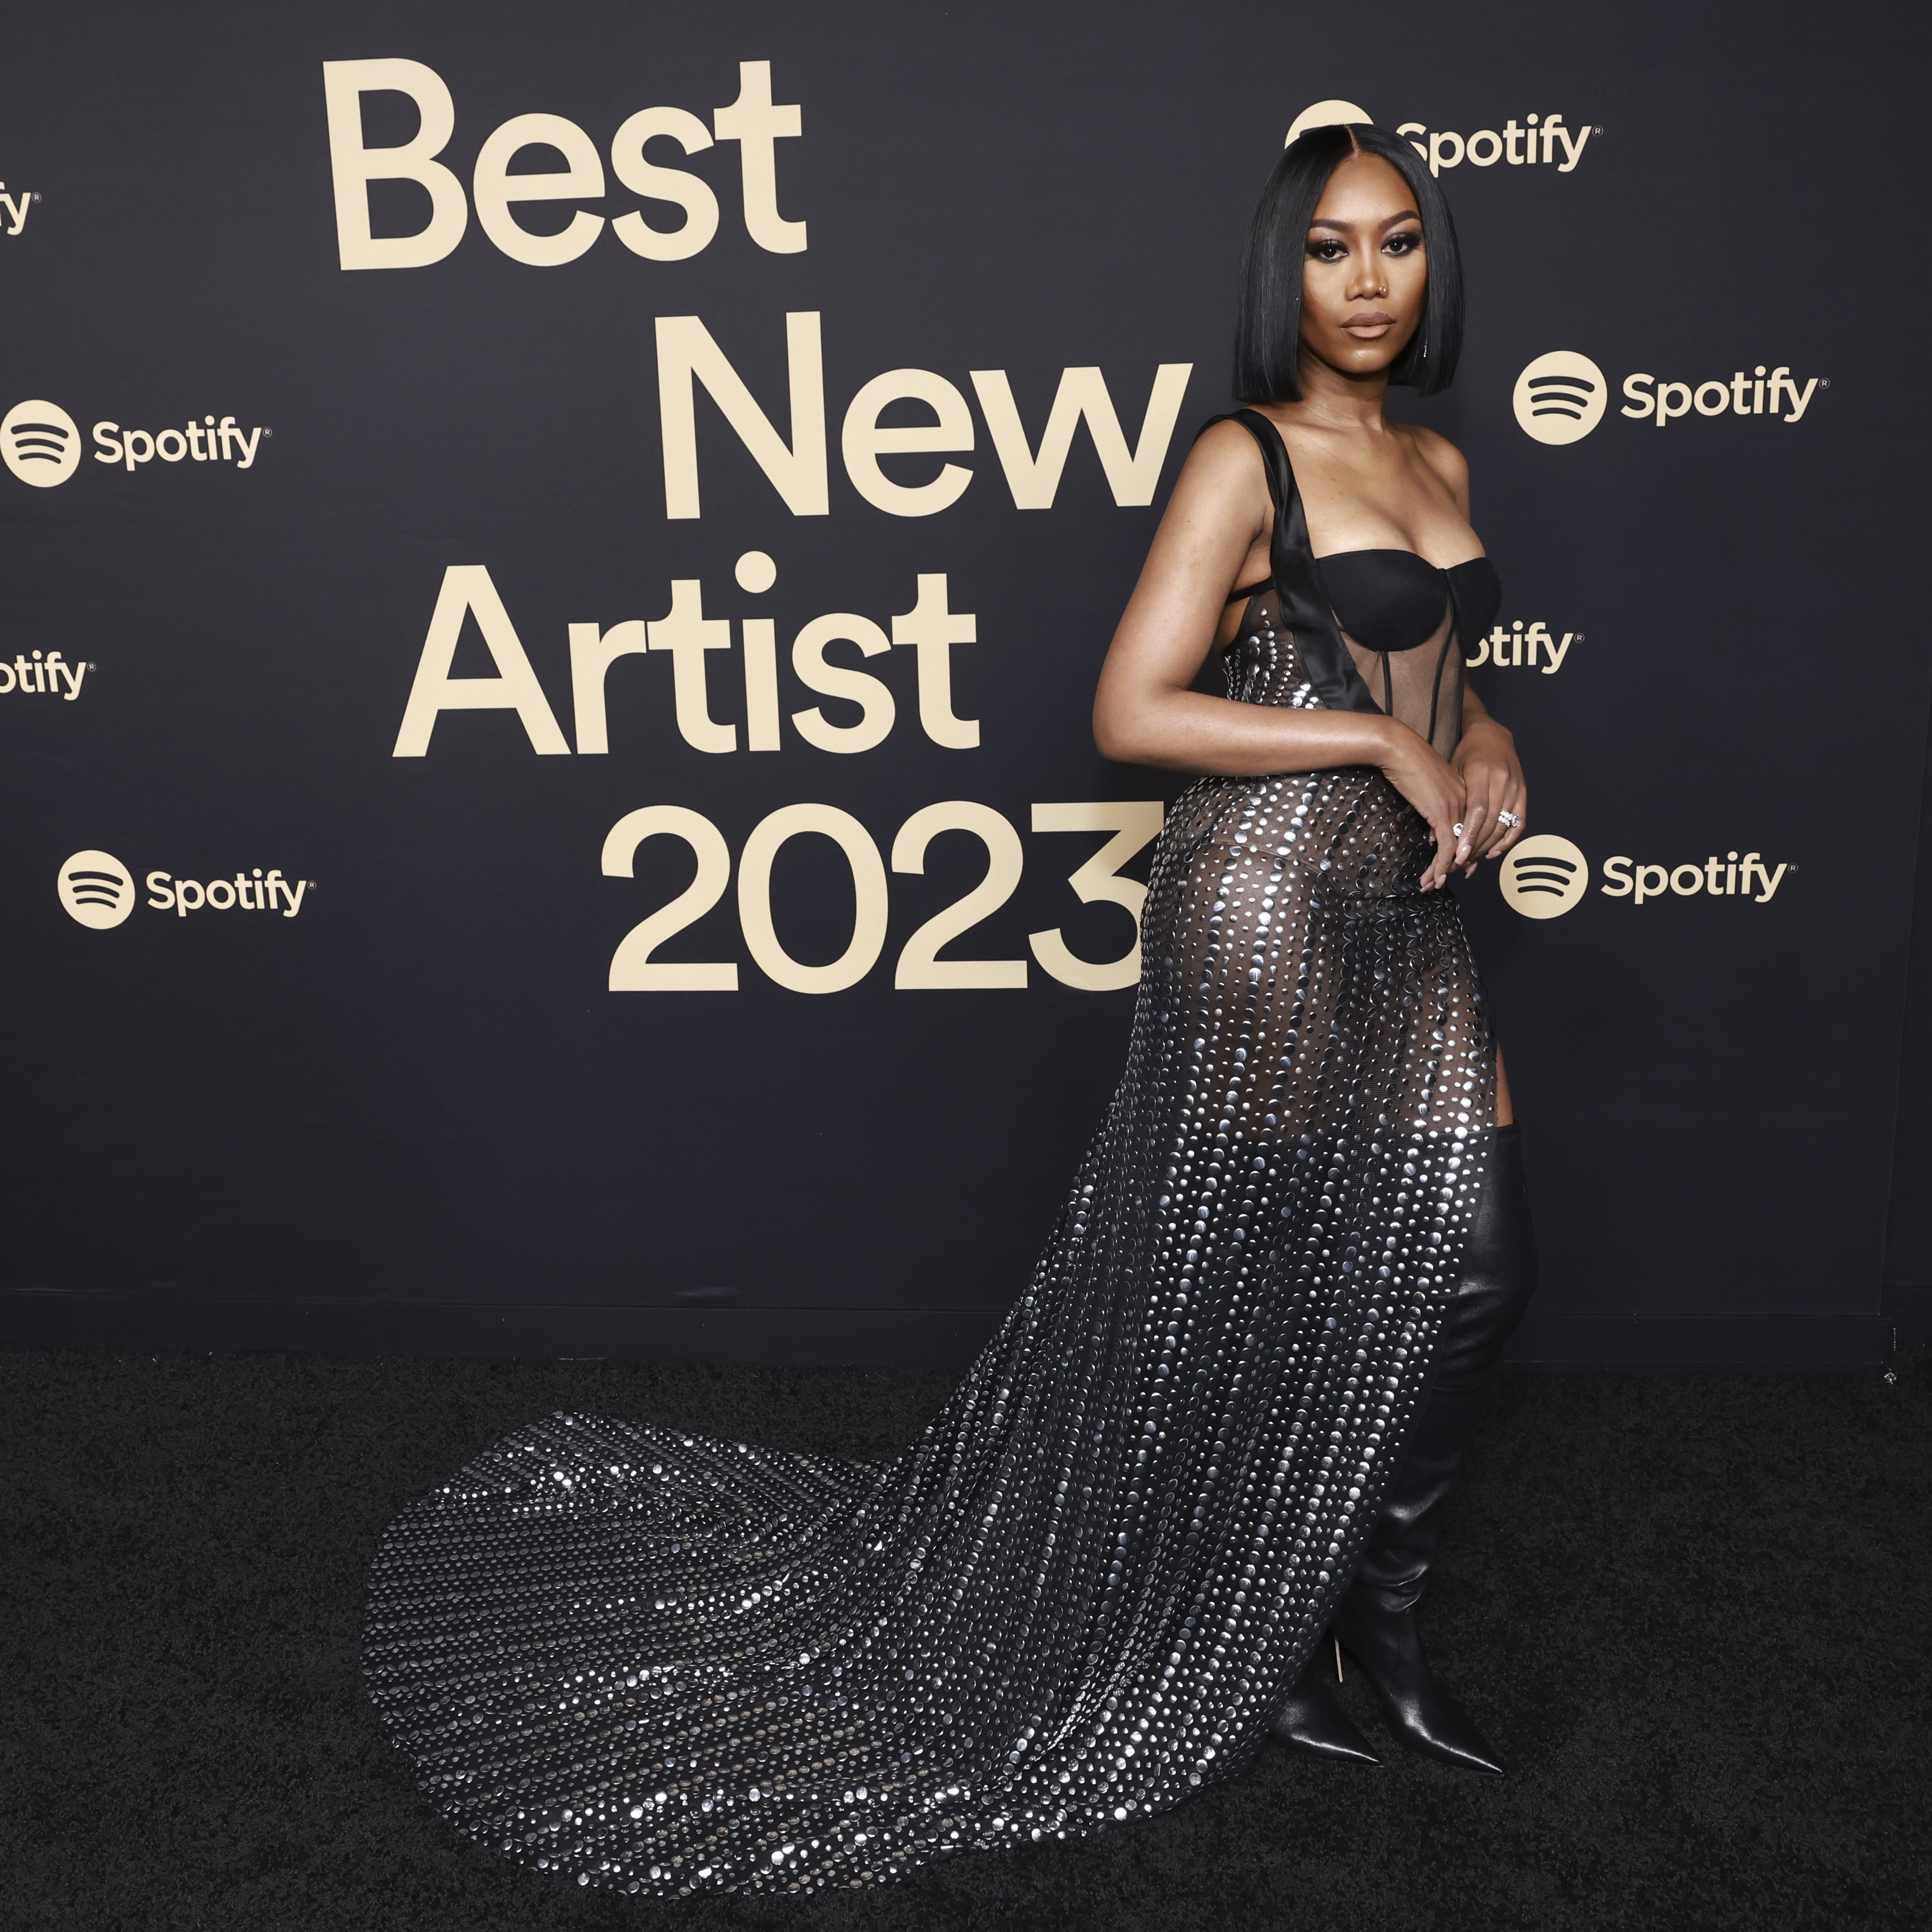 Spotify's 2023 Best New Artist Party